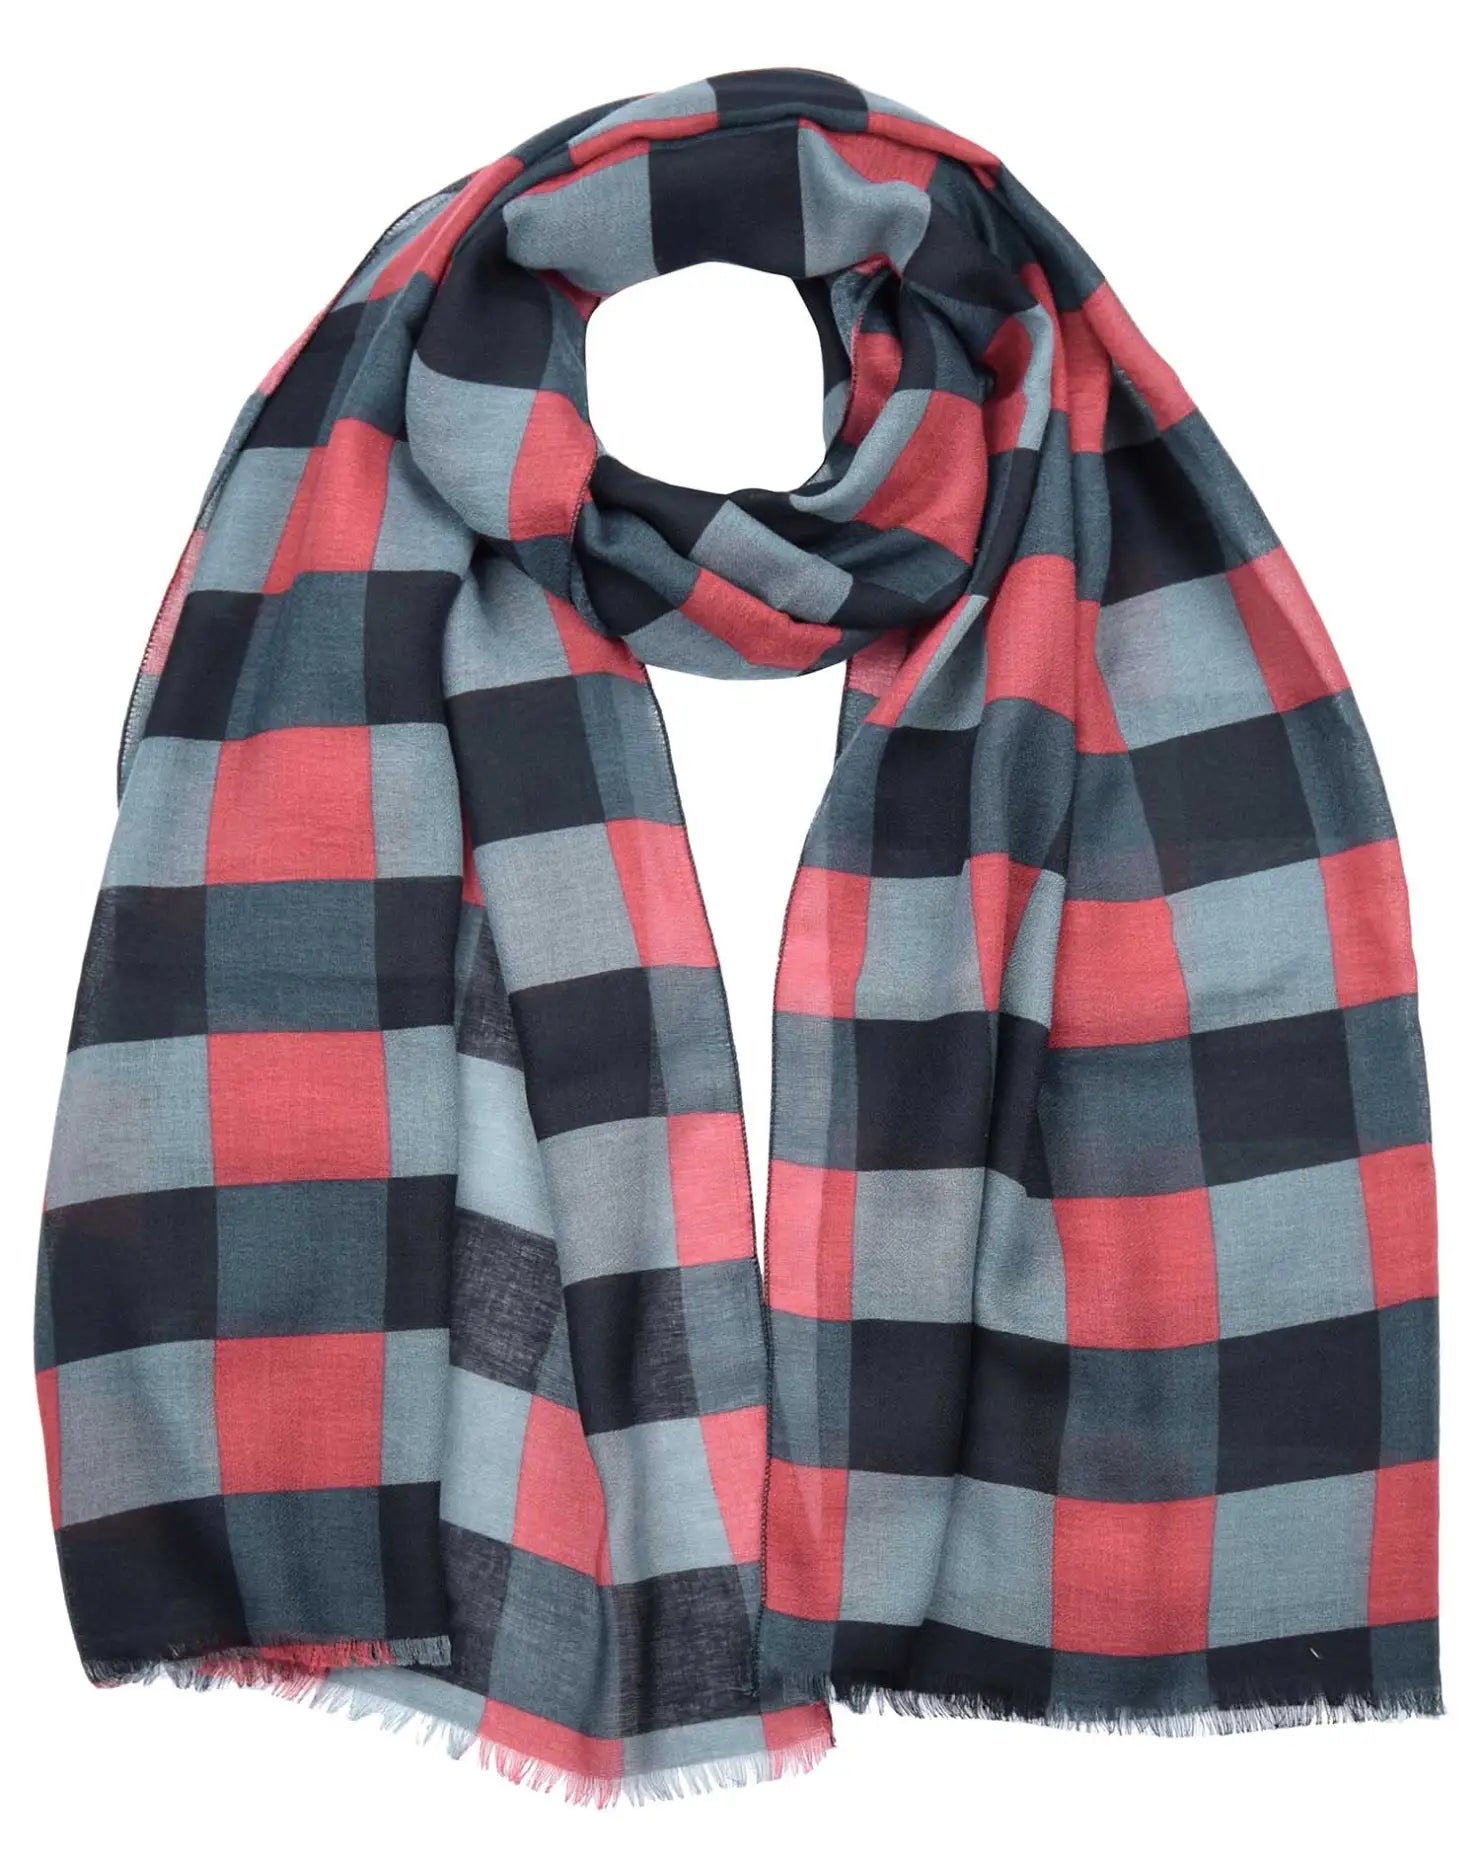 Gingham check print red and black oversized scarf